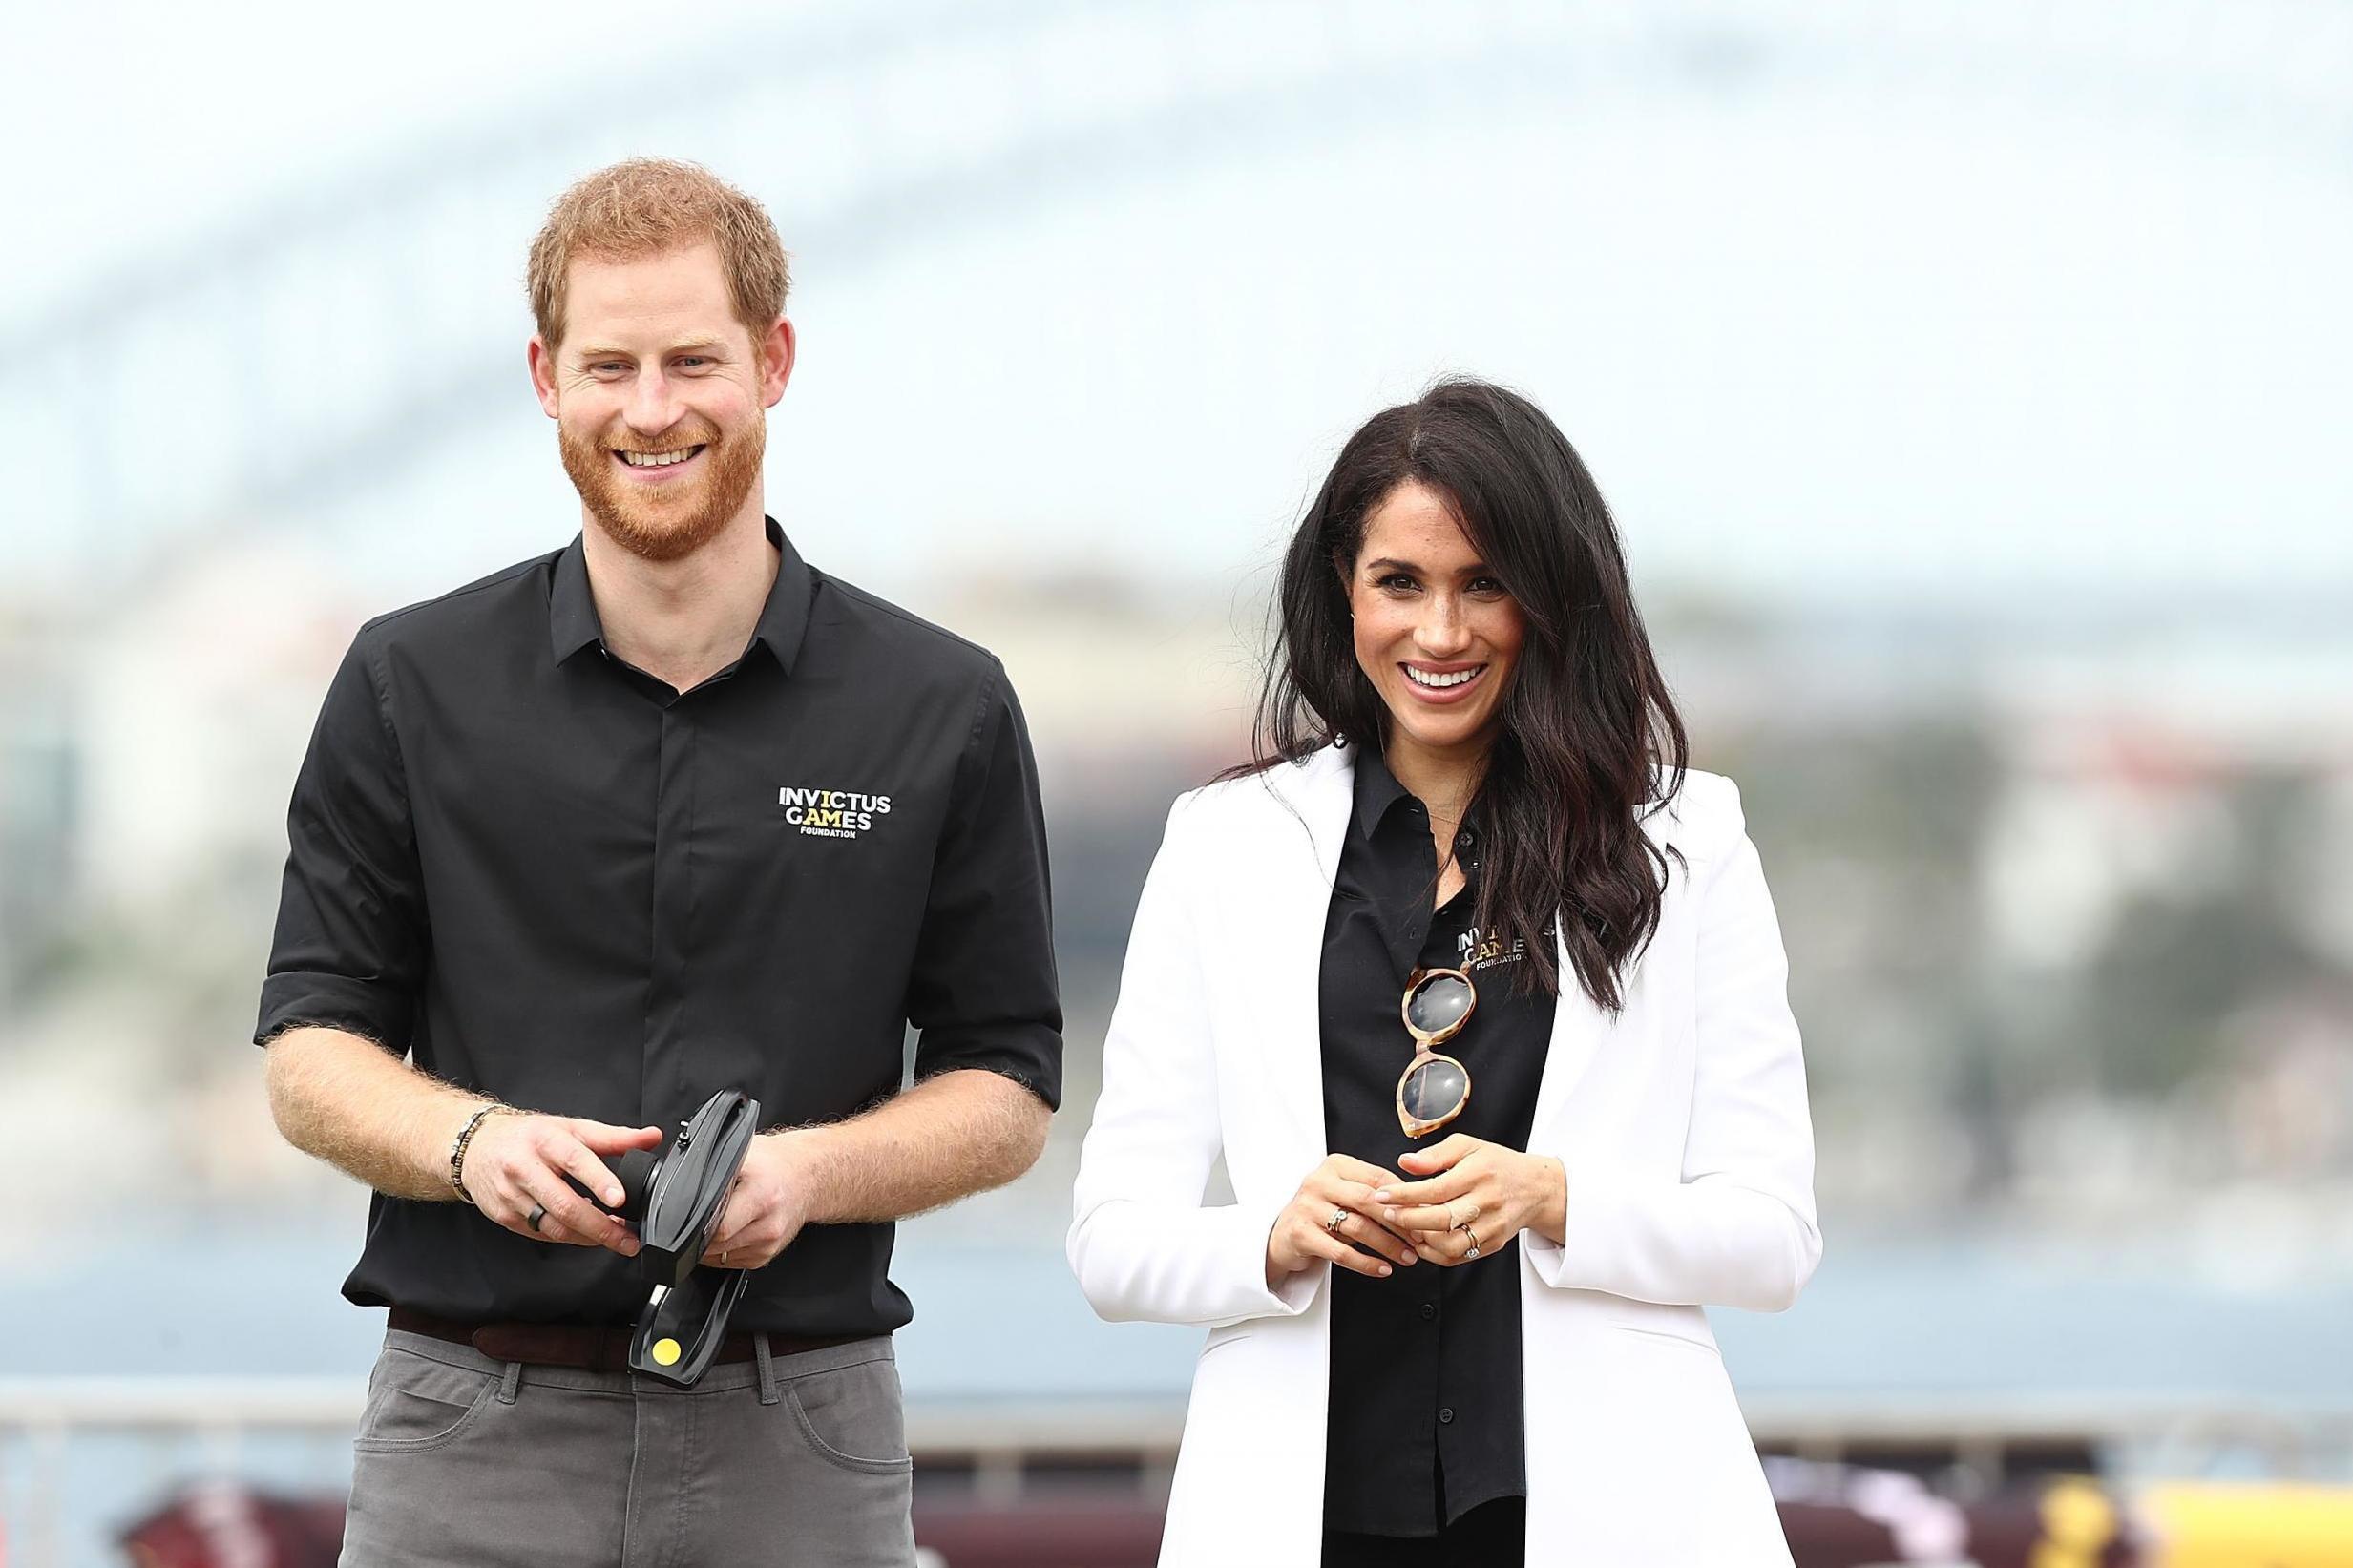 Prince Harry says 'life has changed dramatically' in new video about Invictus Games